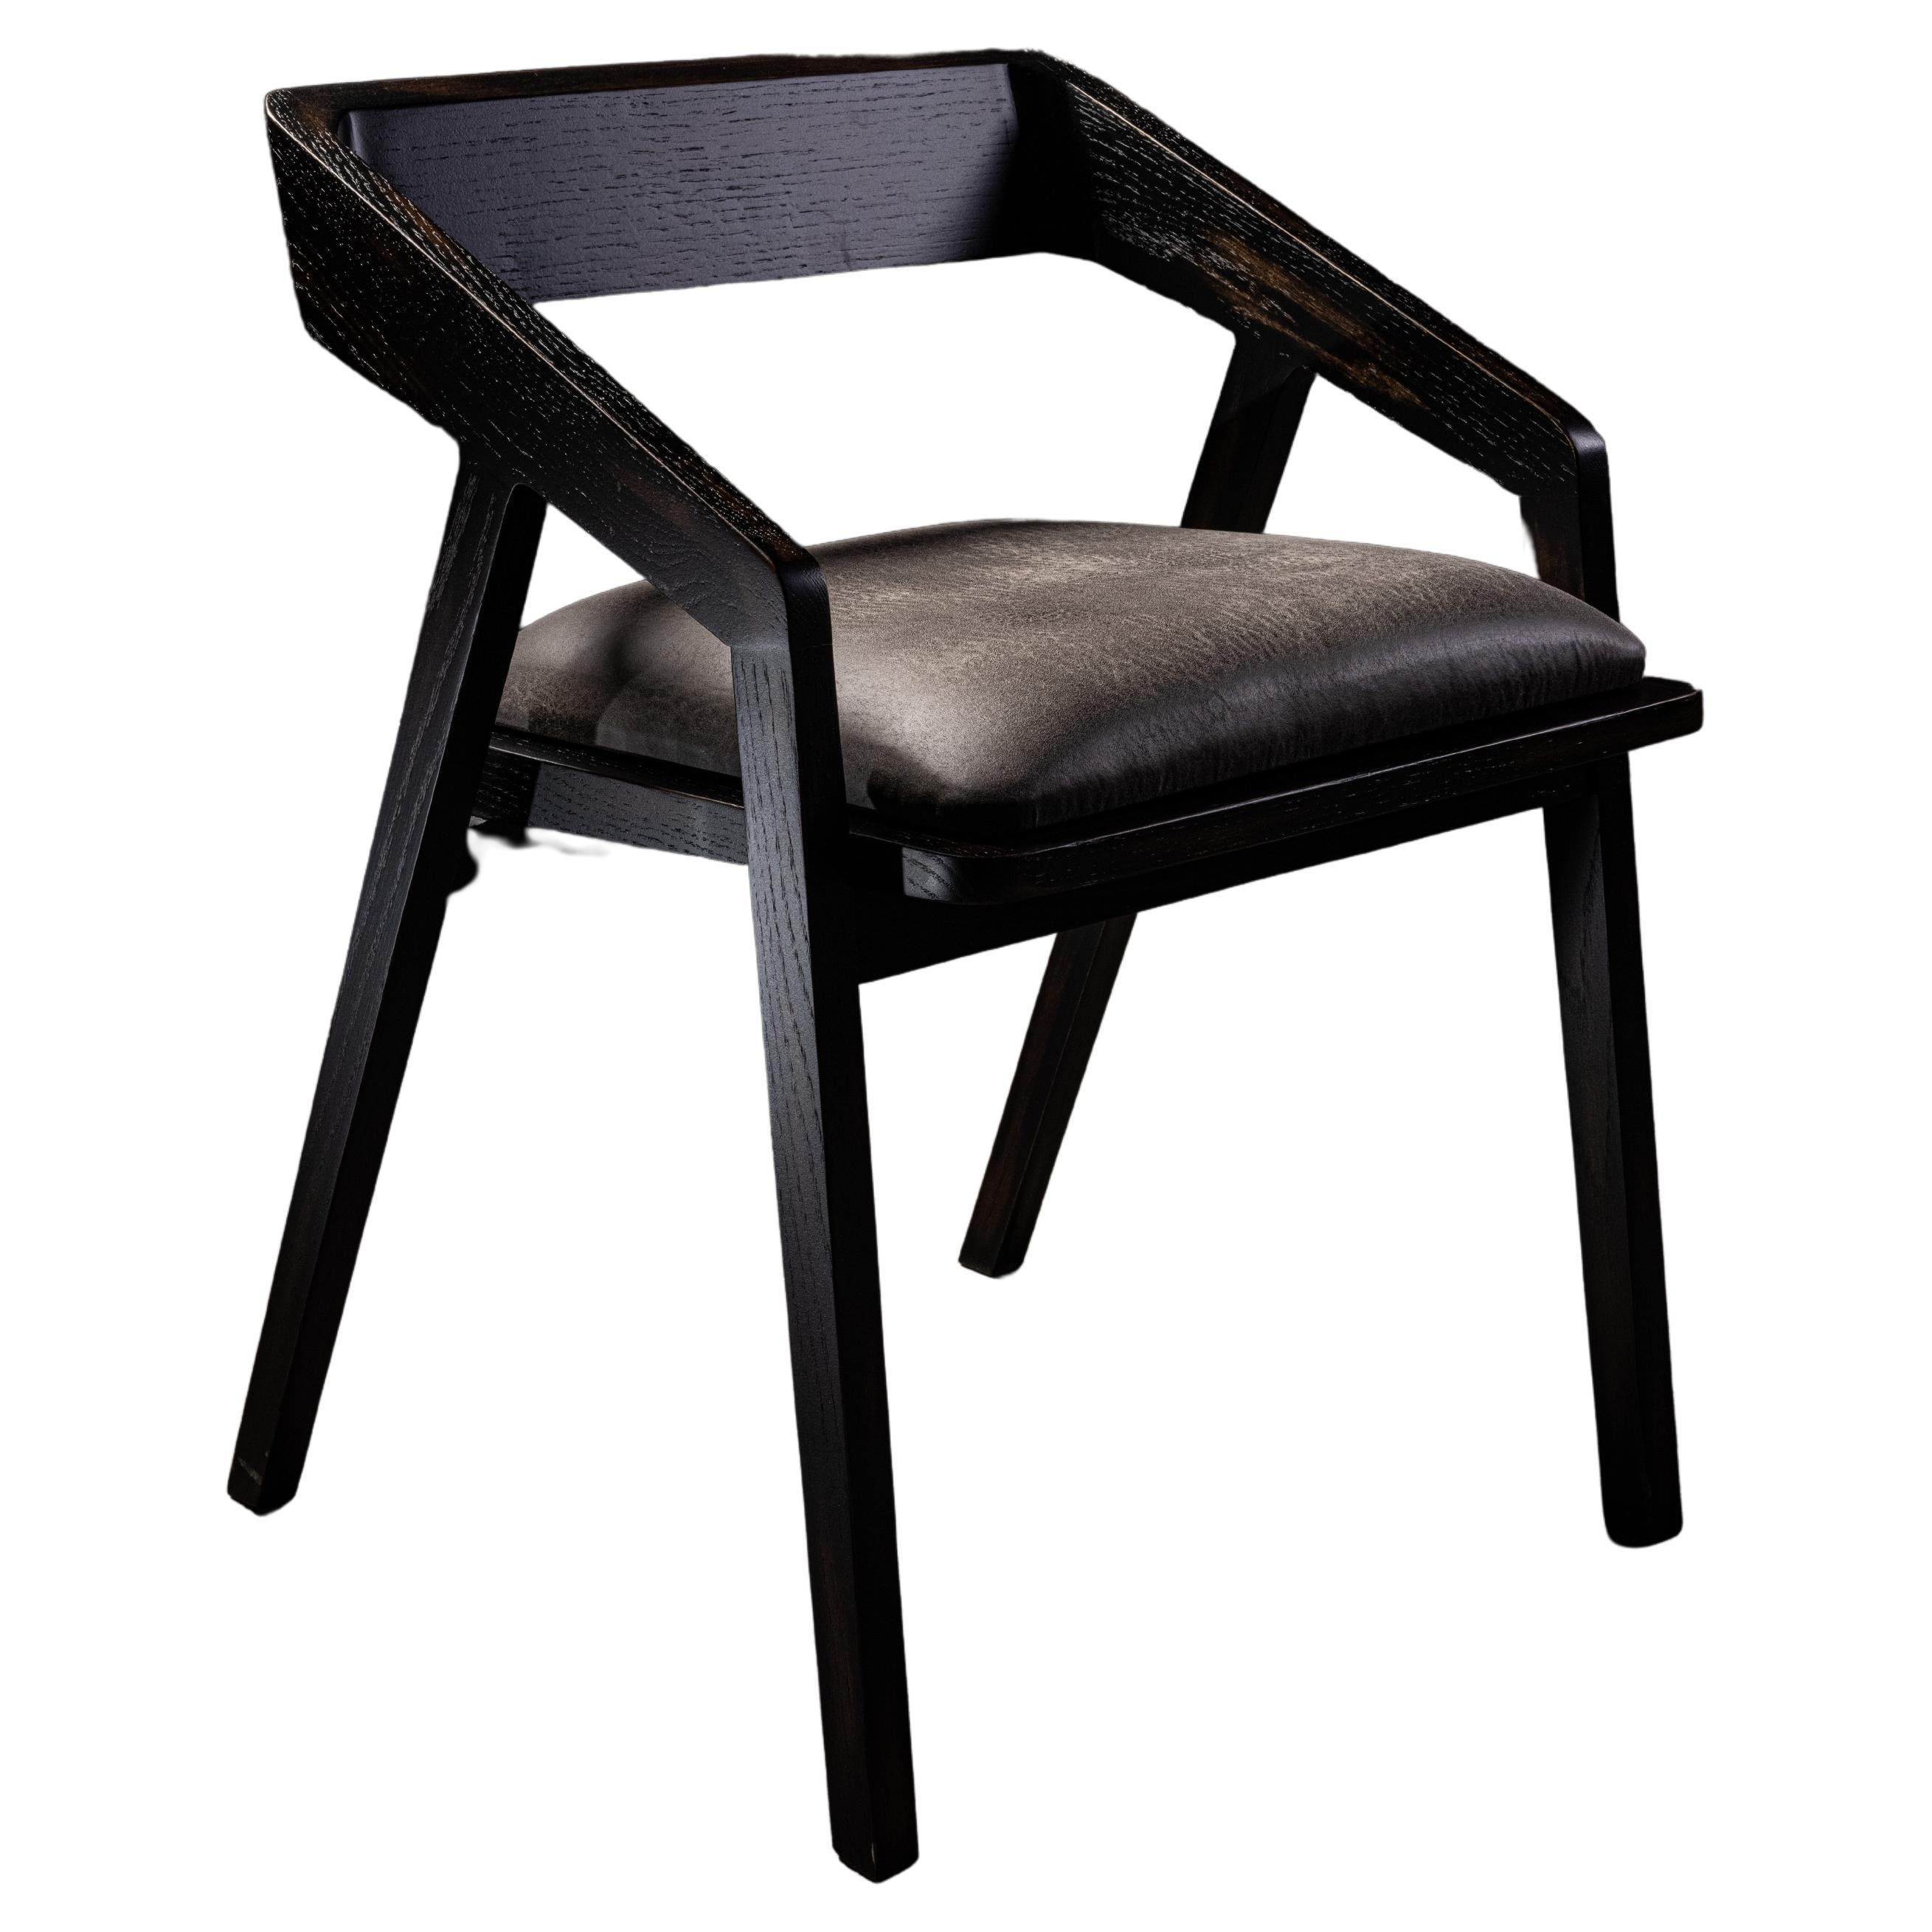 Mr. V Arm Chair For Sale